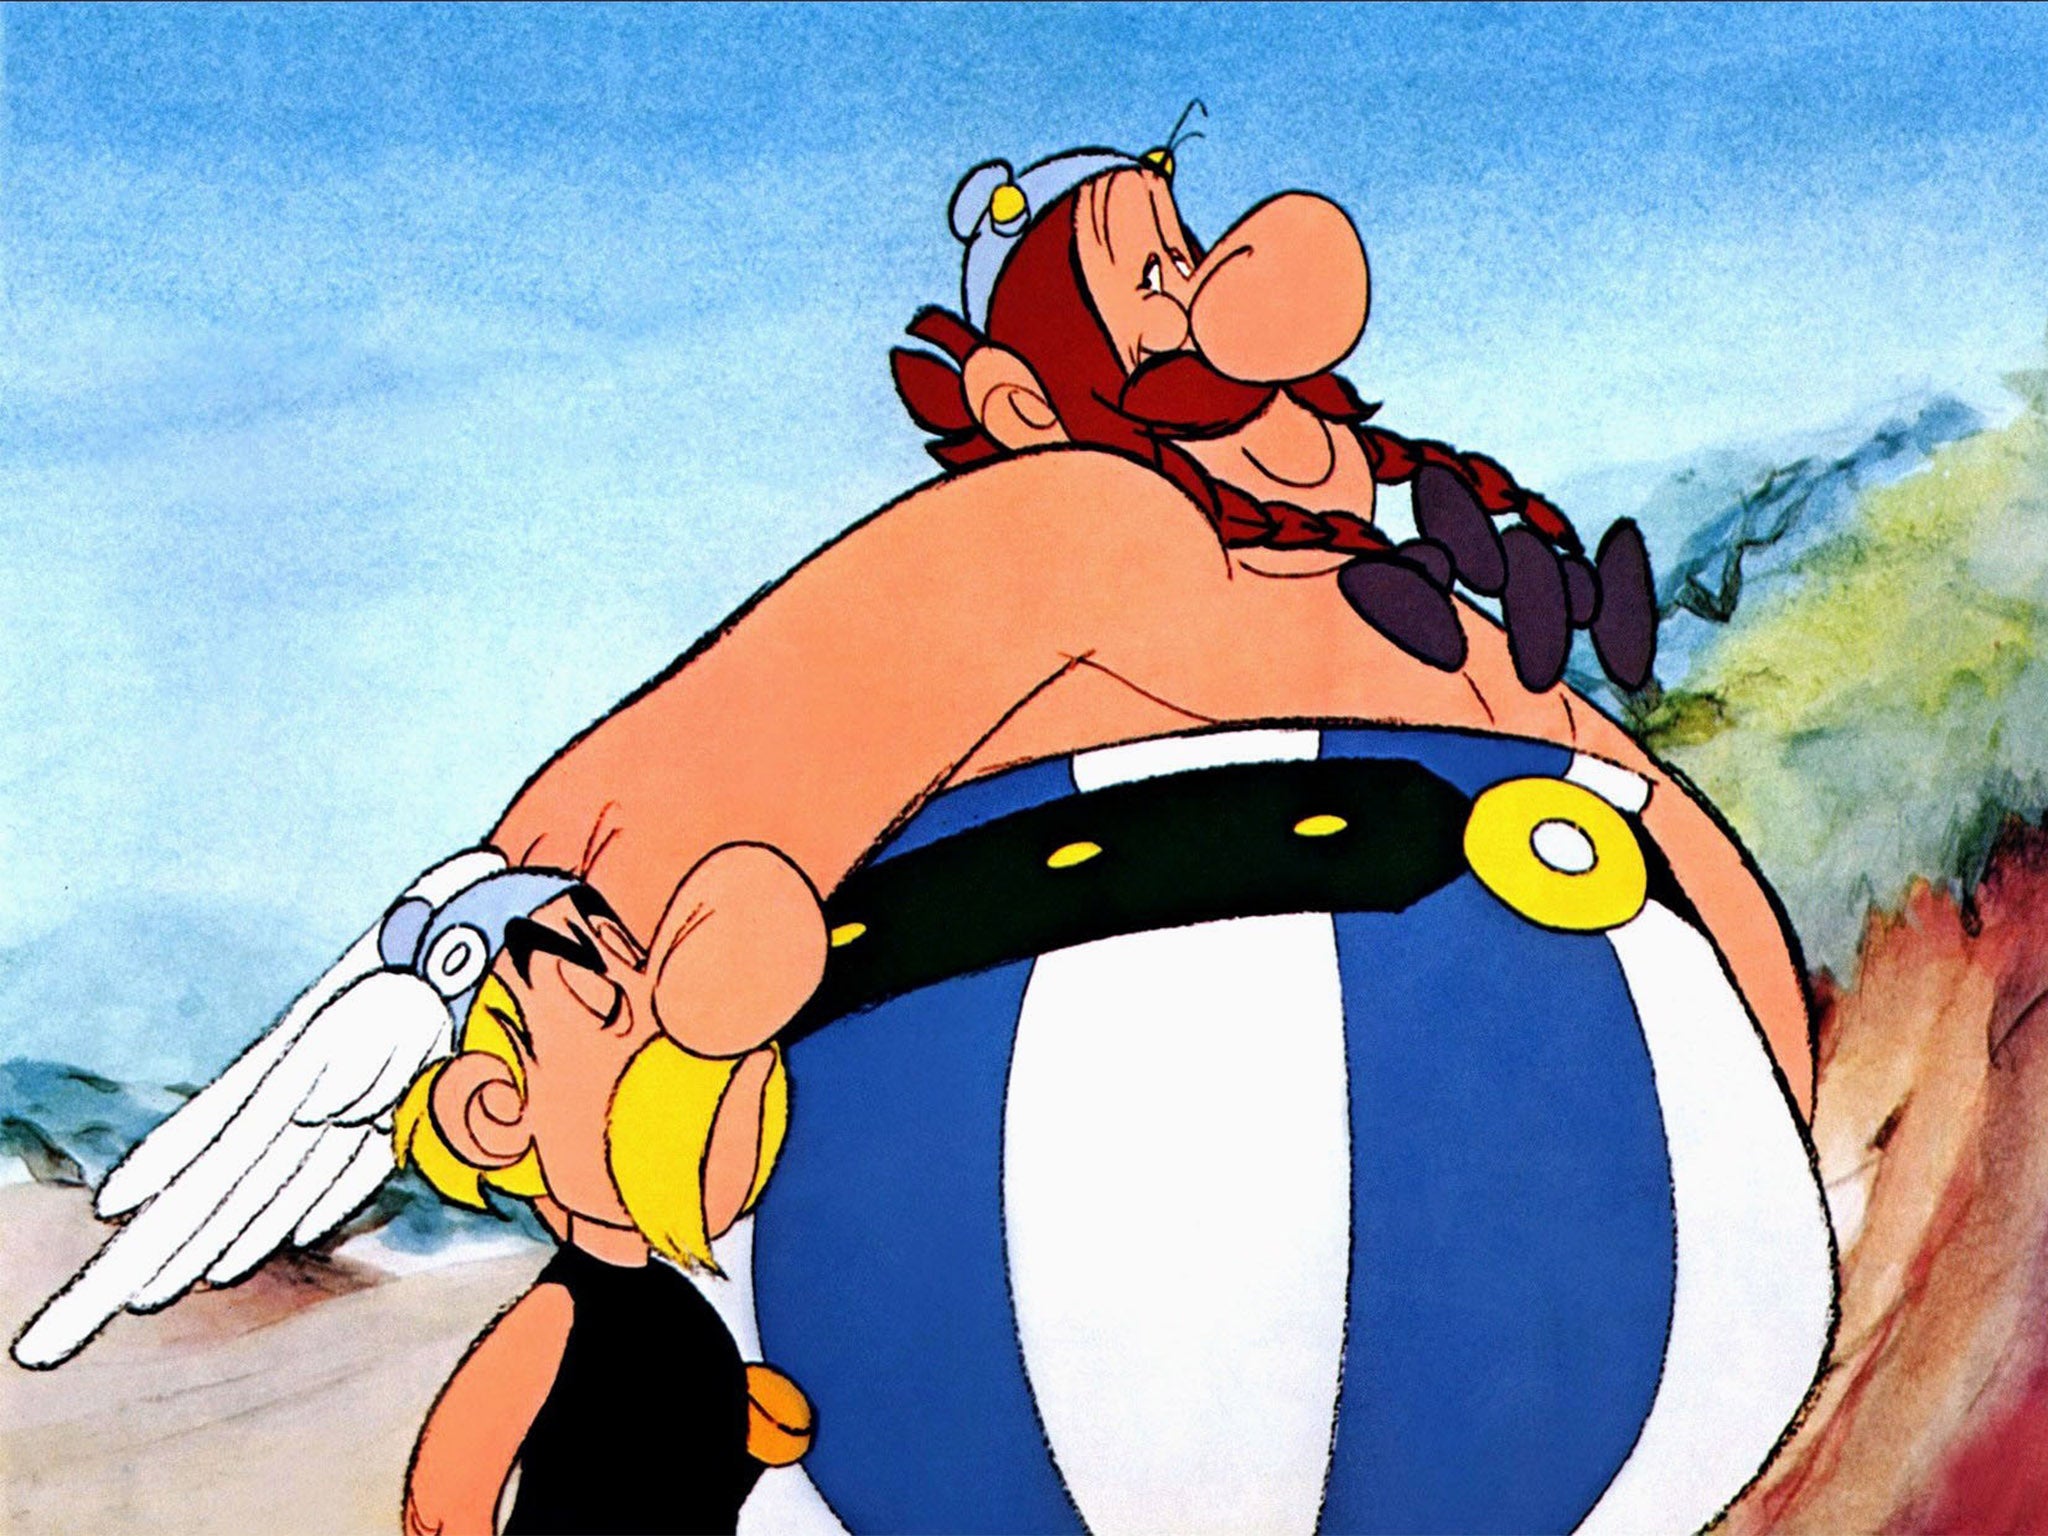 Asterix and Obelix in ‘The Twelve Tasks of Asterix’ (1976)